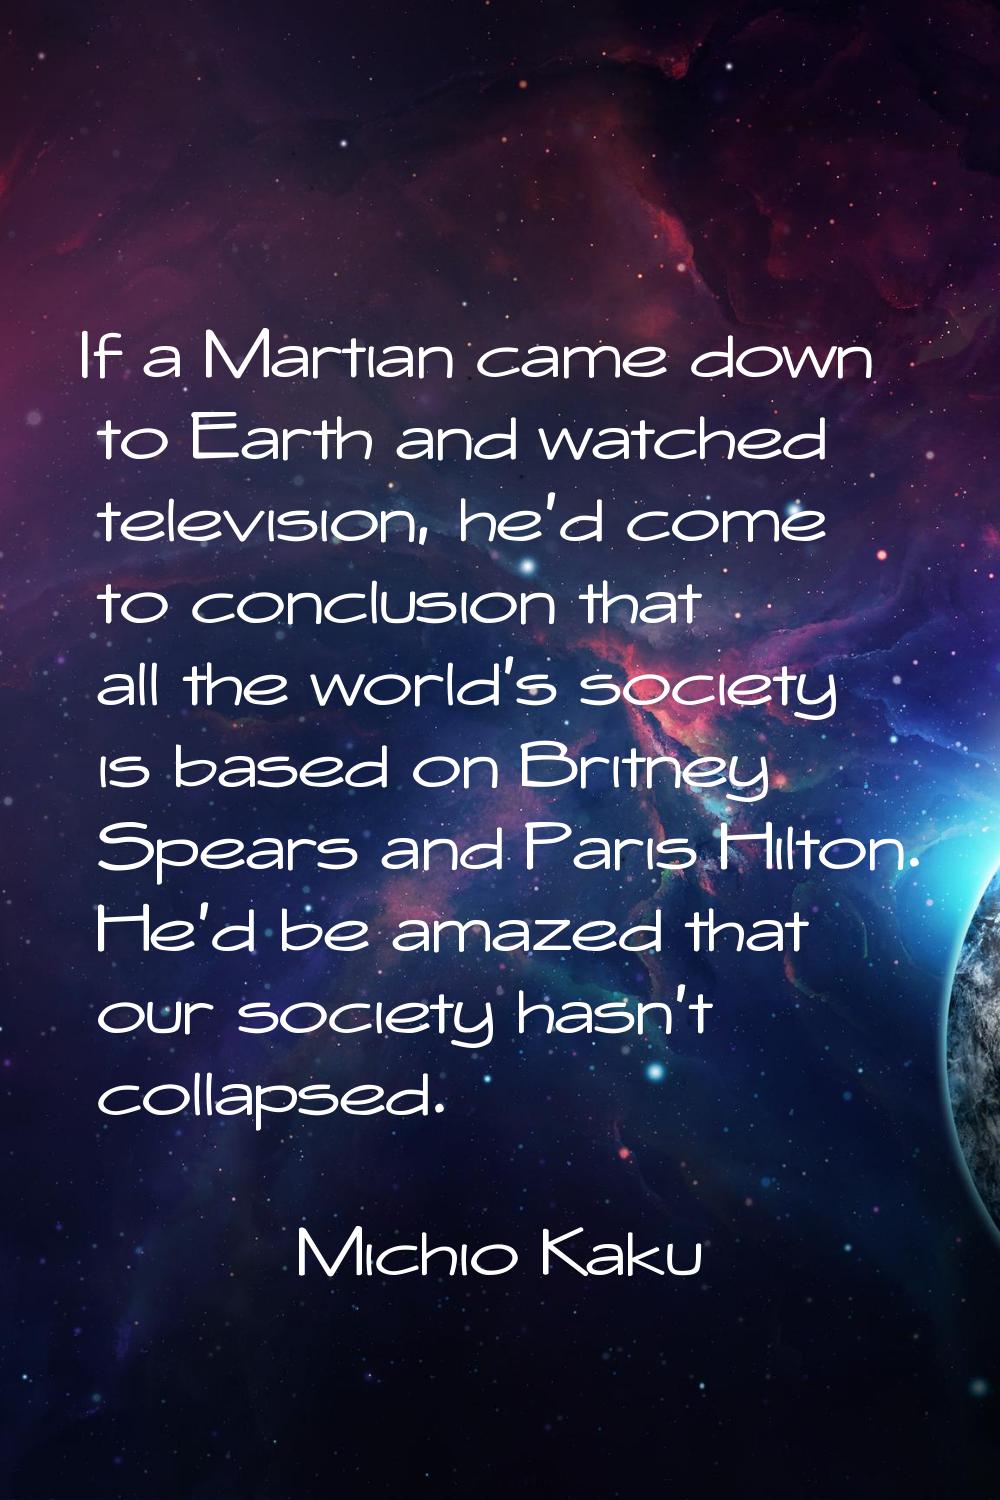 If a Martian came down to Earth and watched television, he'd come to conclusion that all the world'